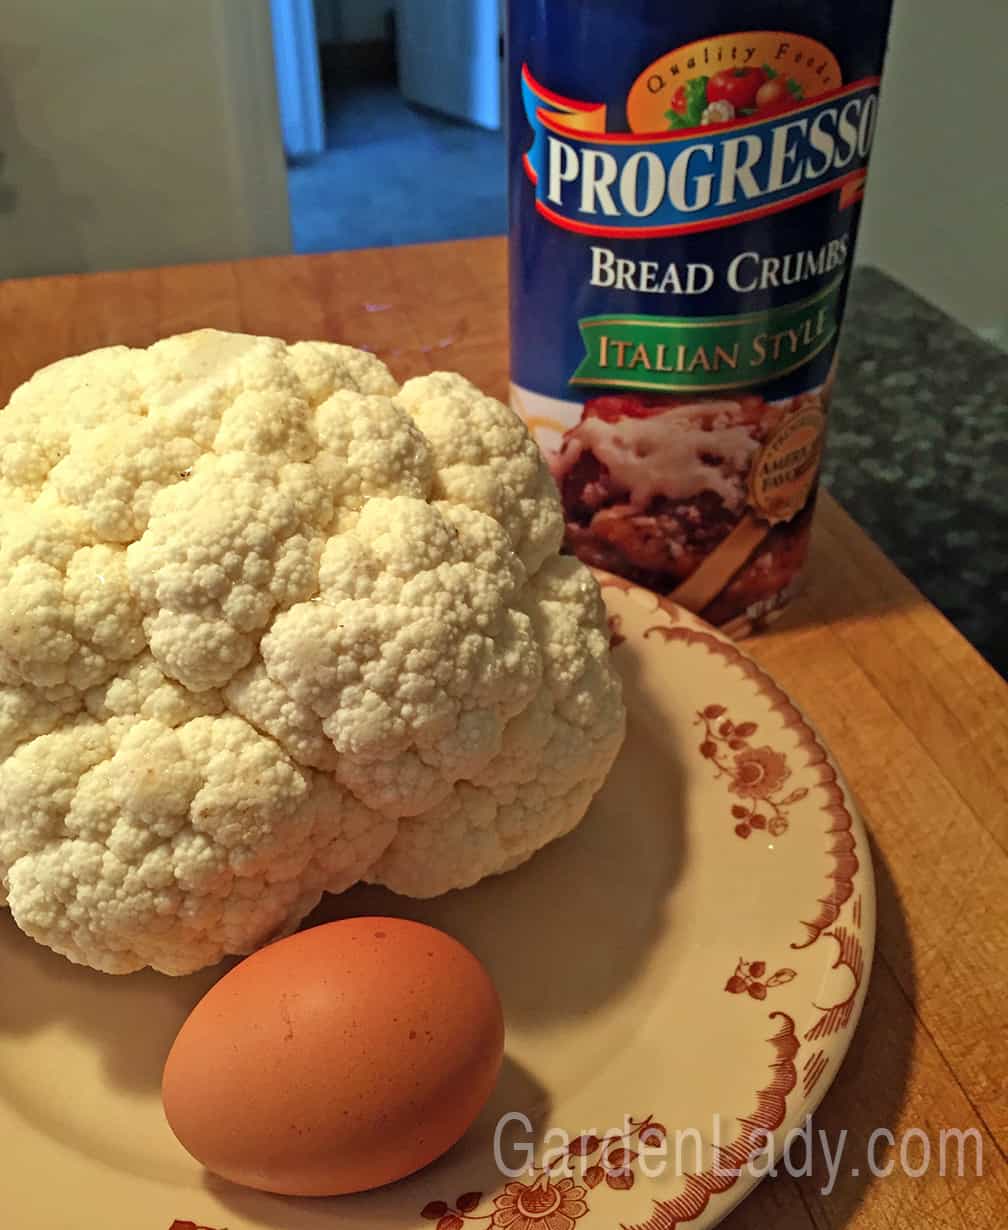 One head of cauliflower, one egg, and bread crumbs. Simple. I used Italian flavored bread crumbs, but you could use plain or panko style as well. 